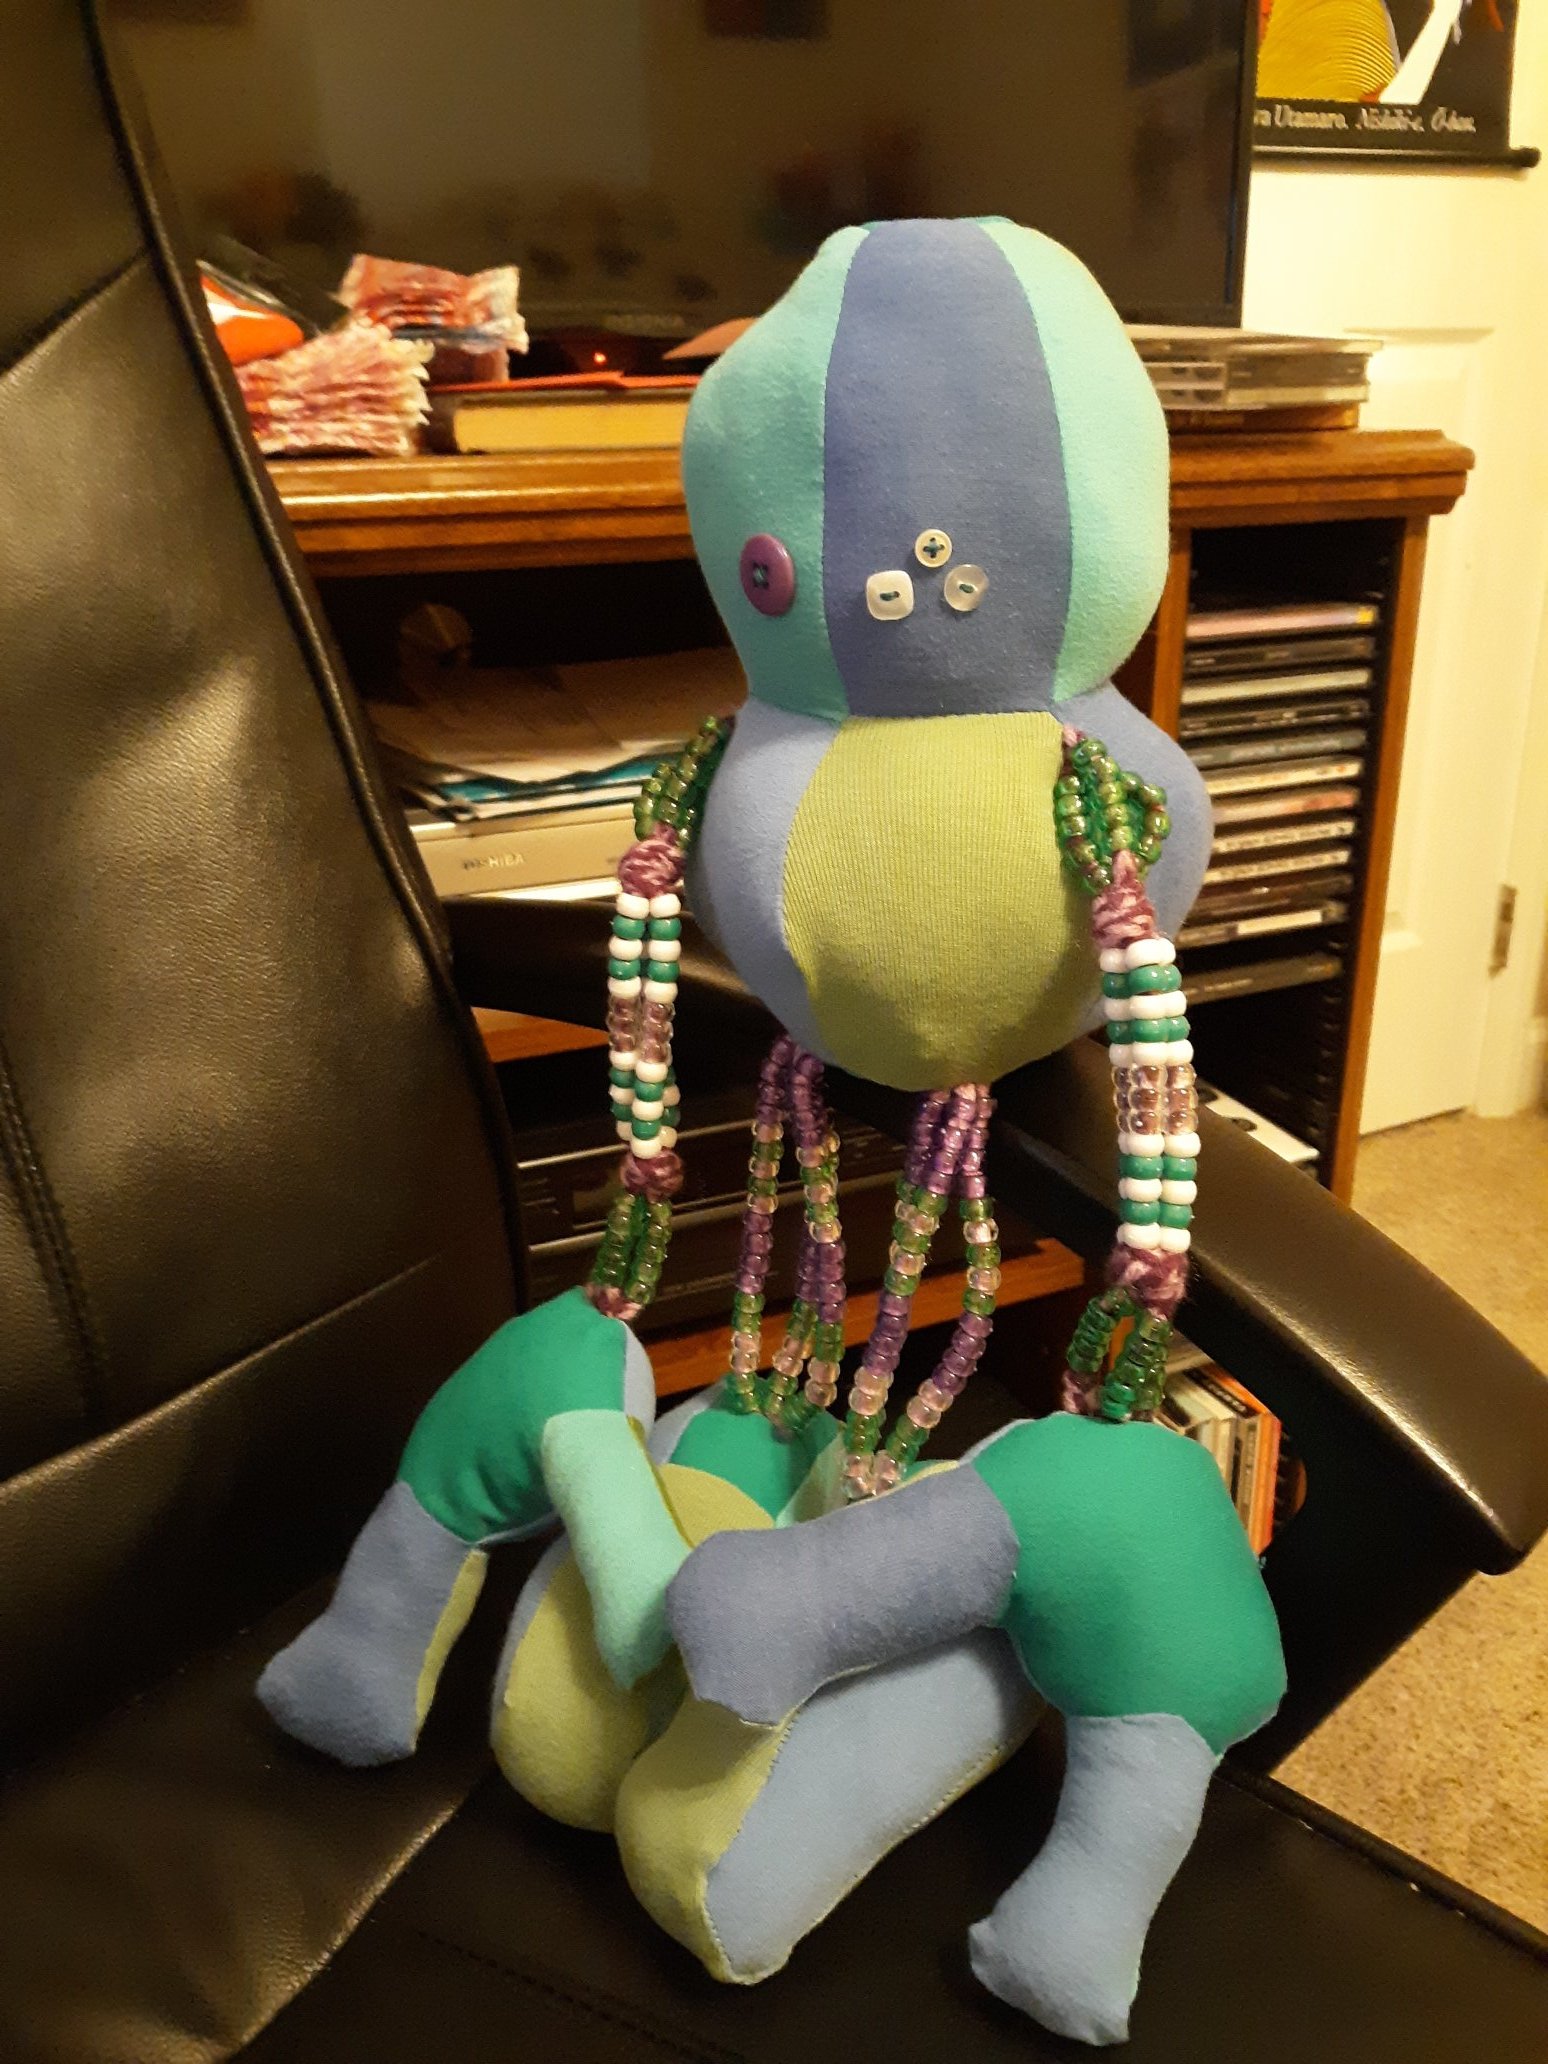 A doll sitting on top of the arm of a chair. The doll is made of different shades of blues and greens. It has a round head with a round body. The head has one purple button eye with three smaller white button eyes. They have two arms sticking out of the sides of their body. The arms are made of white and green beads. The ends of the arms have hands that are somewhat like claws. The doll also has two legs coming out of the body at the bottom. The legs are also made of beads like the arms and each have a foot at the ends of them. The feet are shaped somewhat like a trapezoid.